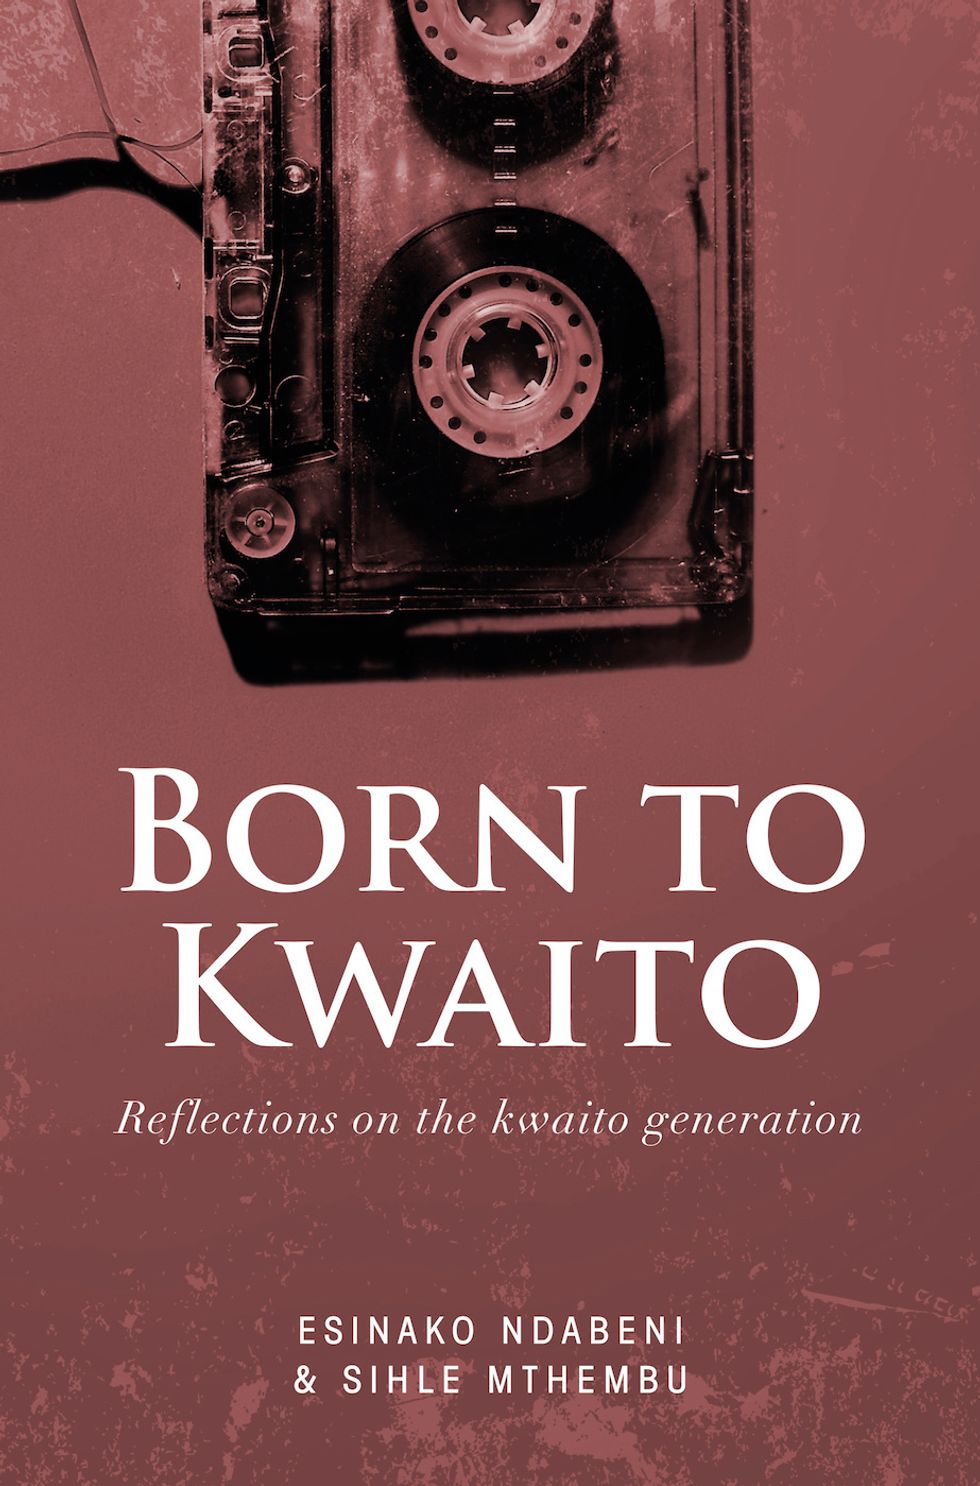 Listen to ‘Born To Kwaito’ Author Sihle Mthembu’s Interview with Cheeky Natives